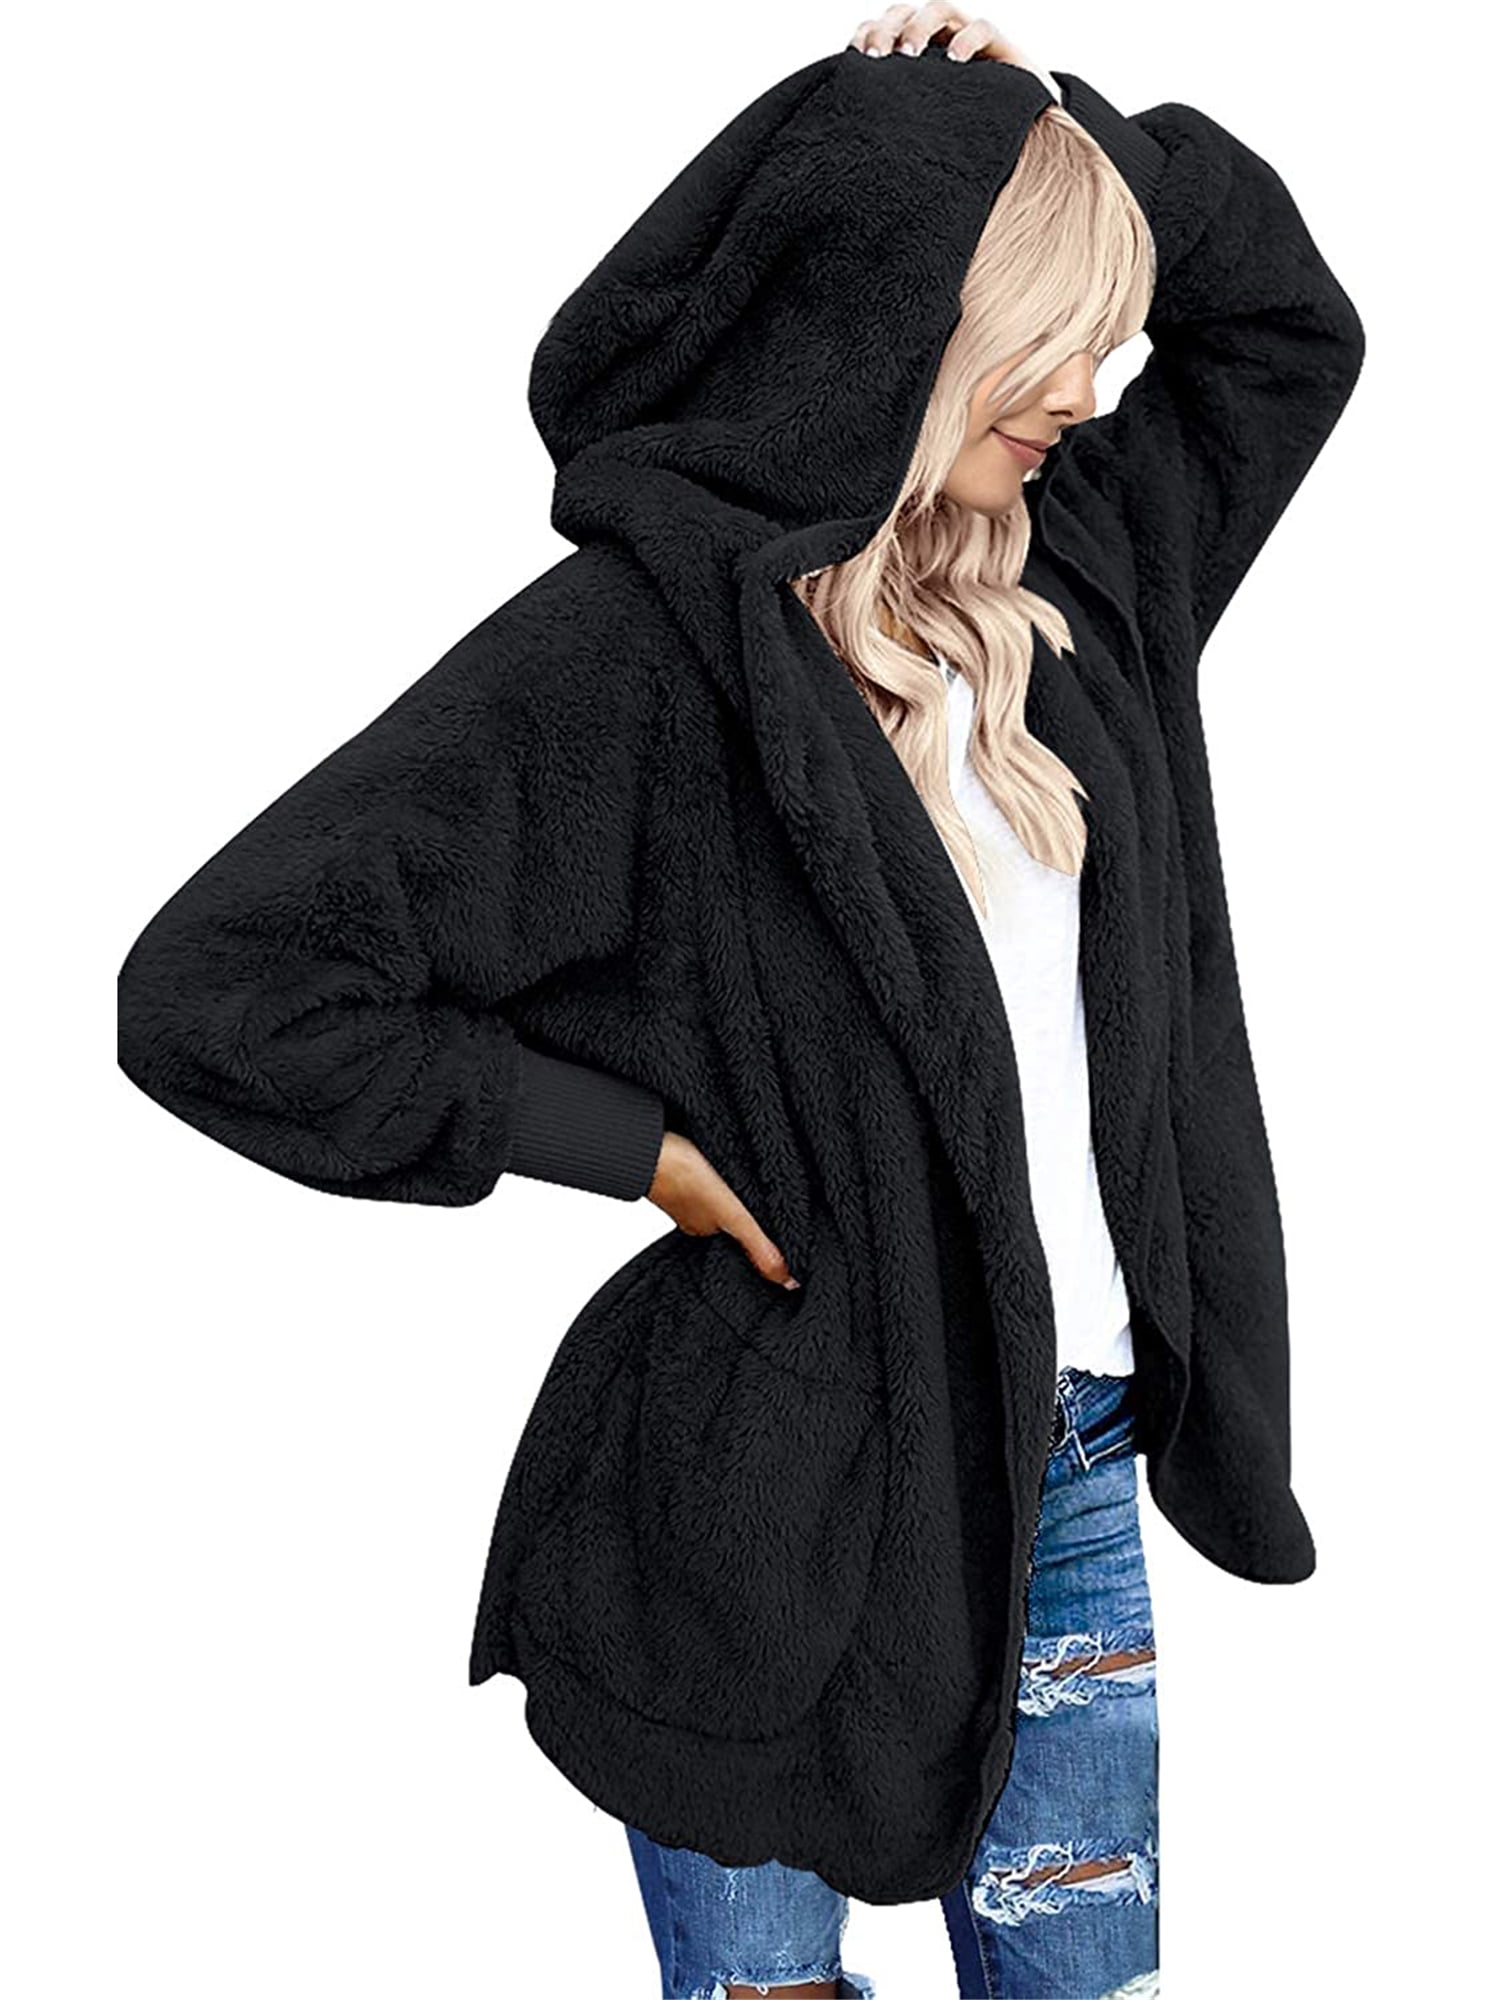 JLDP Contrasting Lamb Wool Padded Coat Womens Zip Pullover Hoodies Plush Coat Contrasting Color Casual Fleece Fuzzy Outerwear